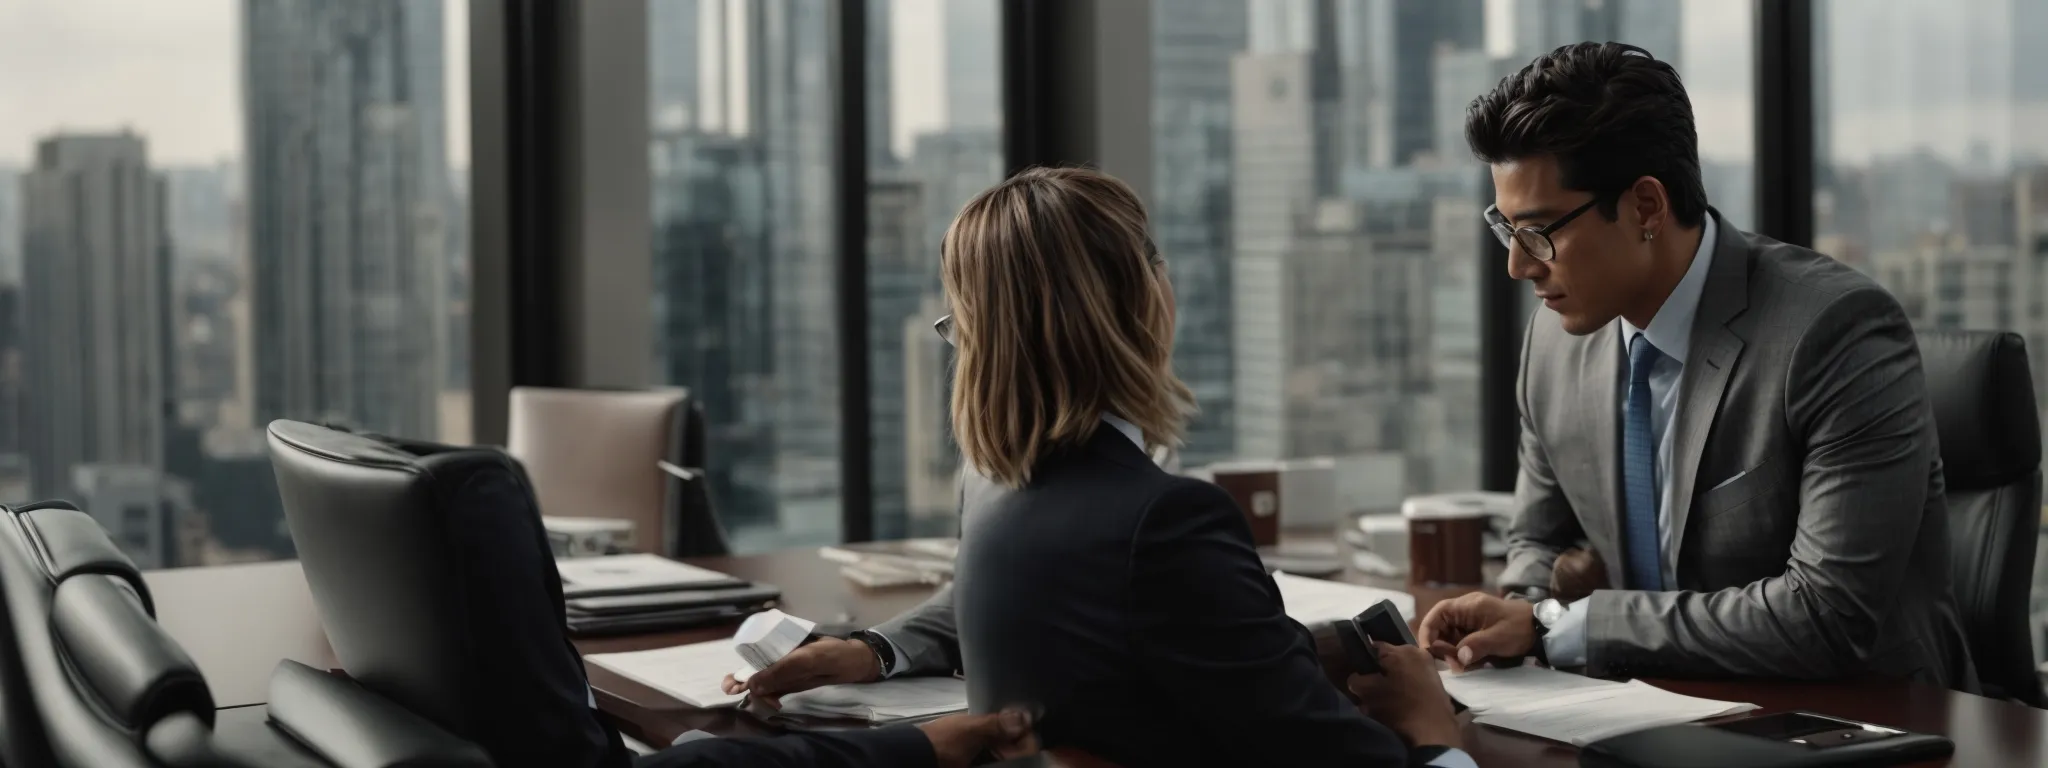 a professional meeting between a loan officer and a client inside a modern office, with focus on a handshake or exchange of documents, against the backdrop of a cityscape, representing local business interaction.